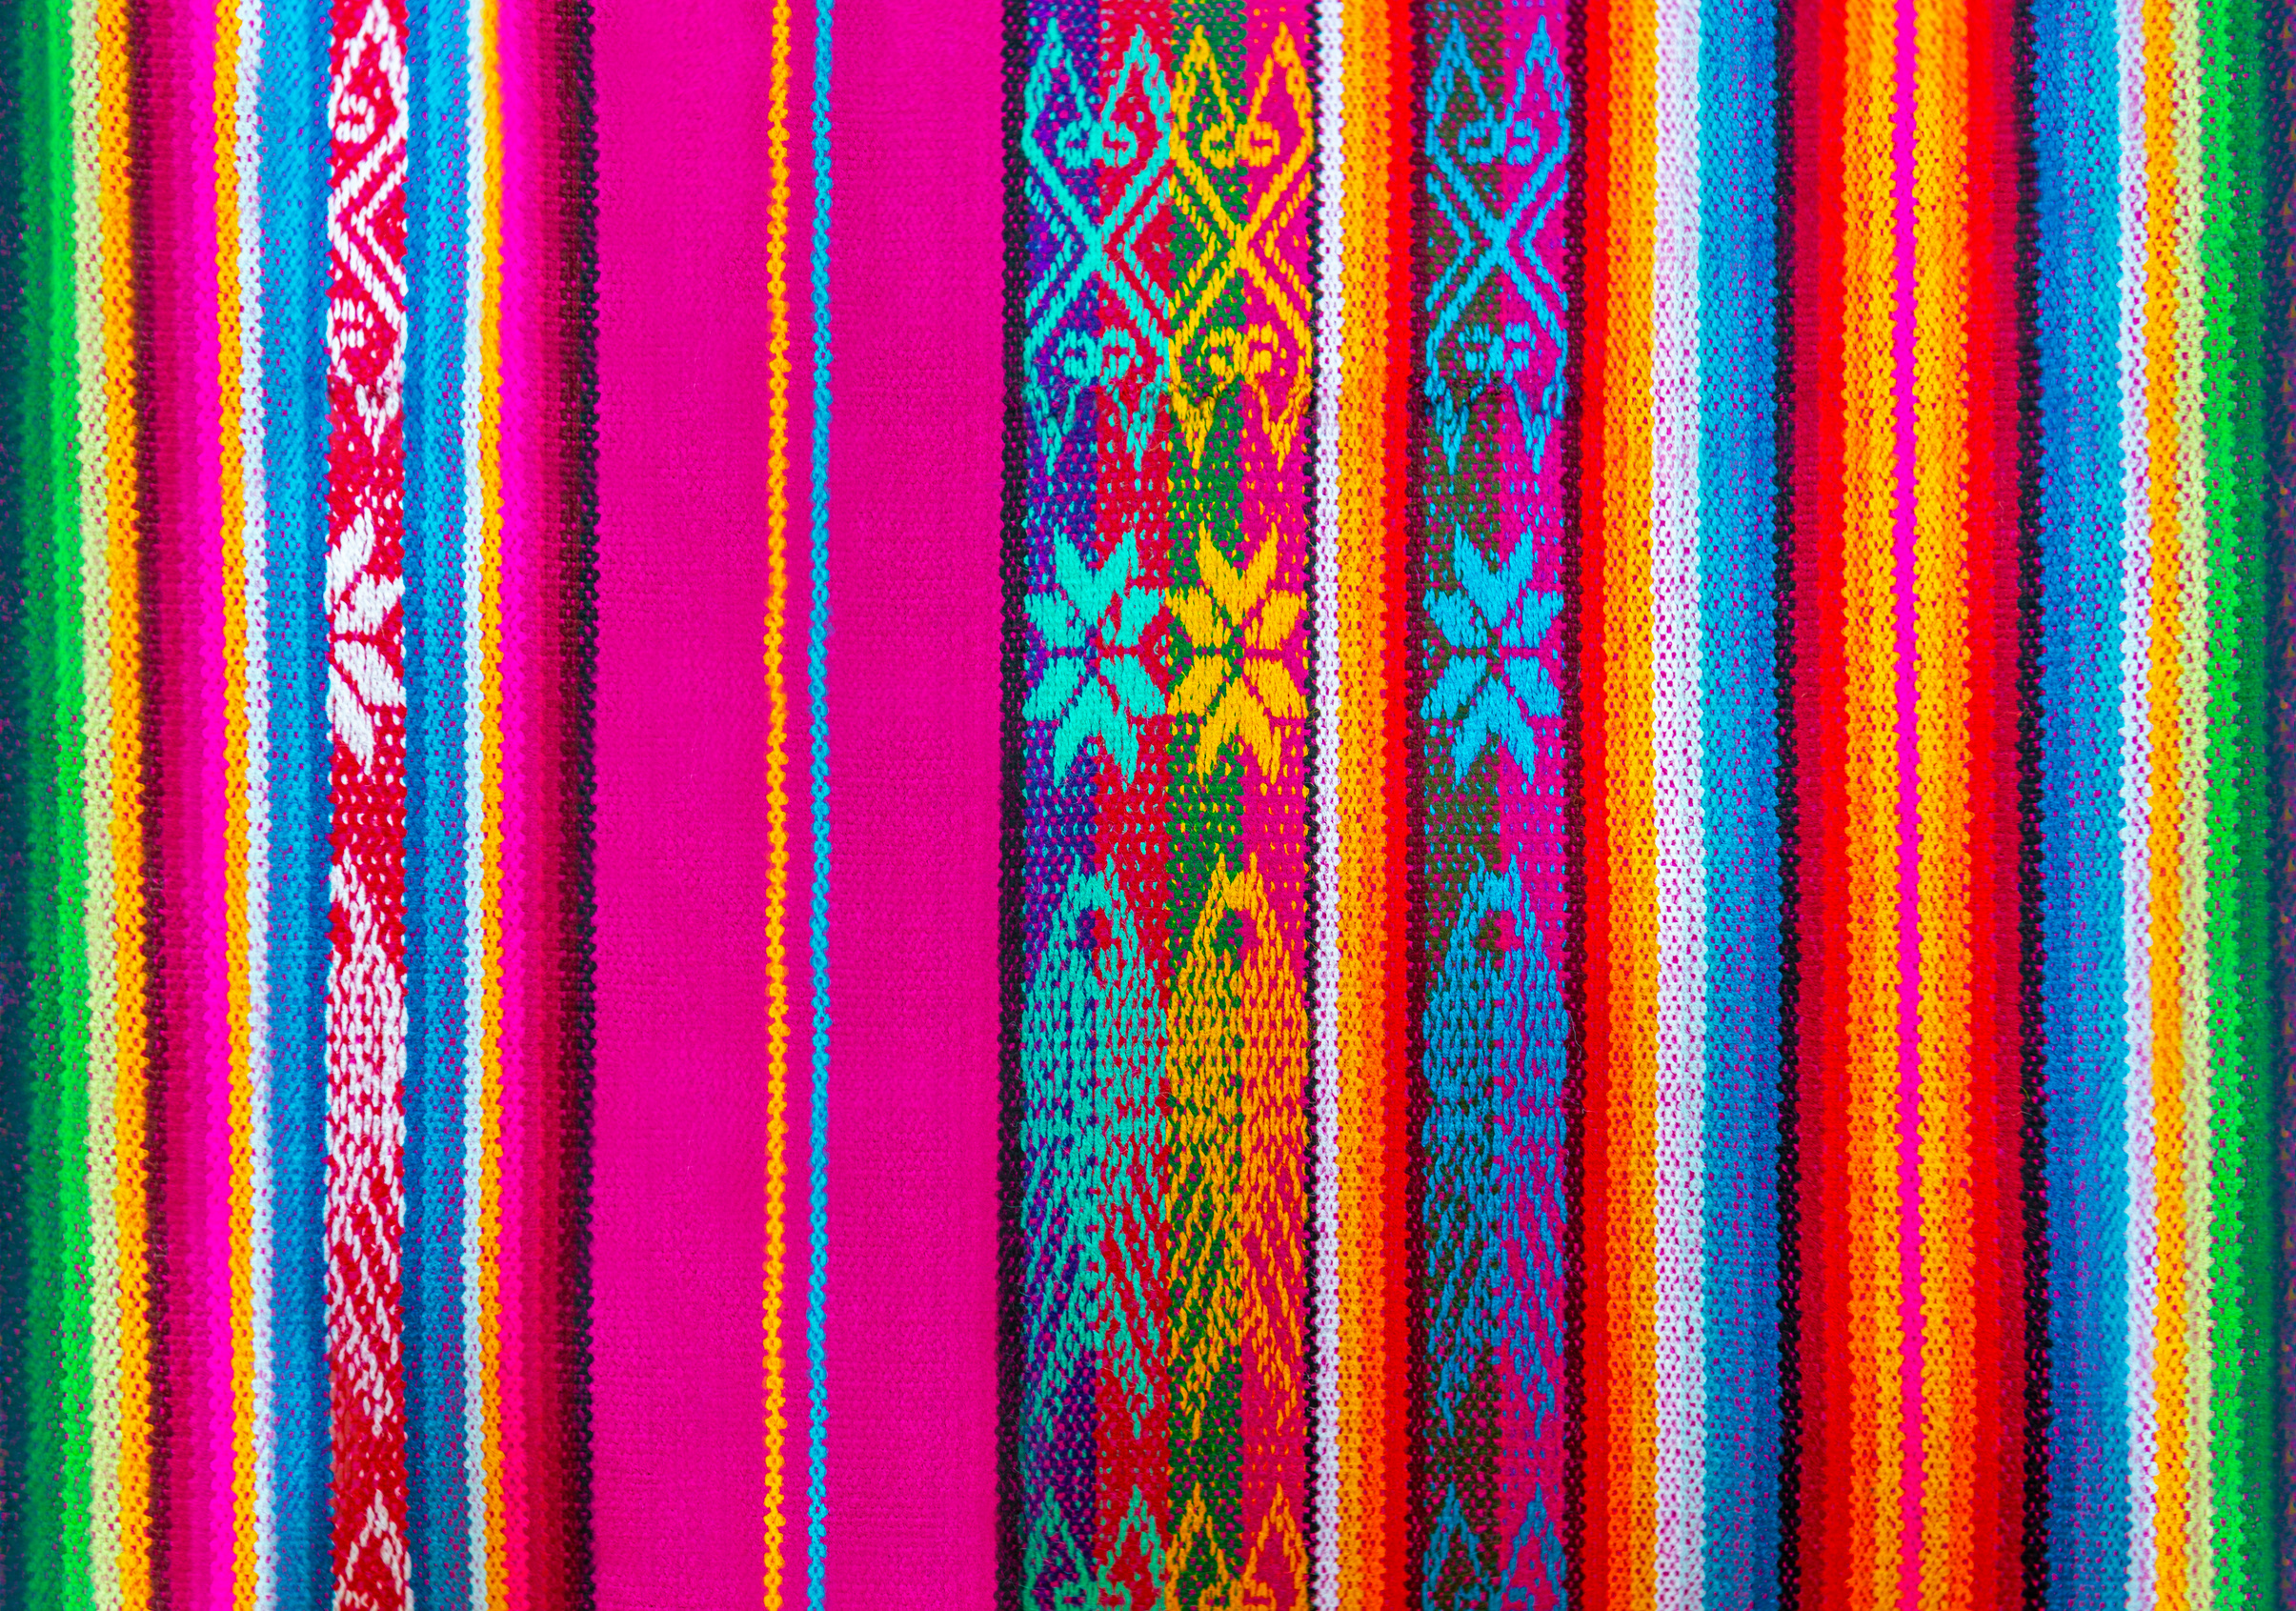 Colorful Indigenous Andes Textile, Cusco, Peru